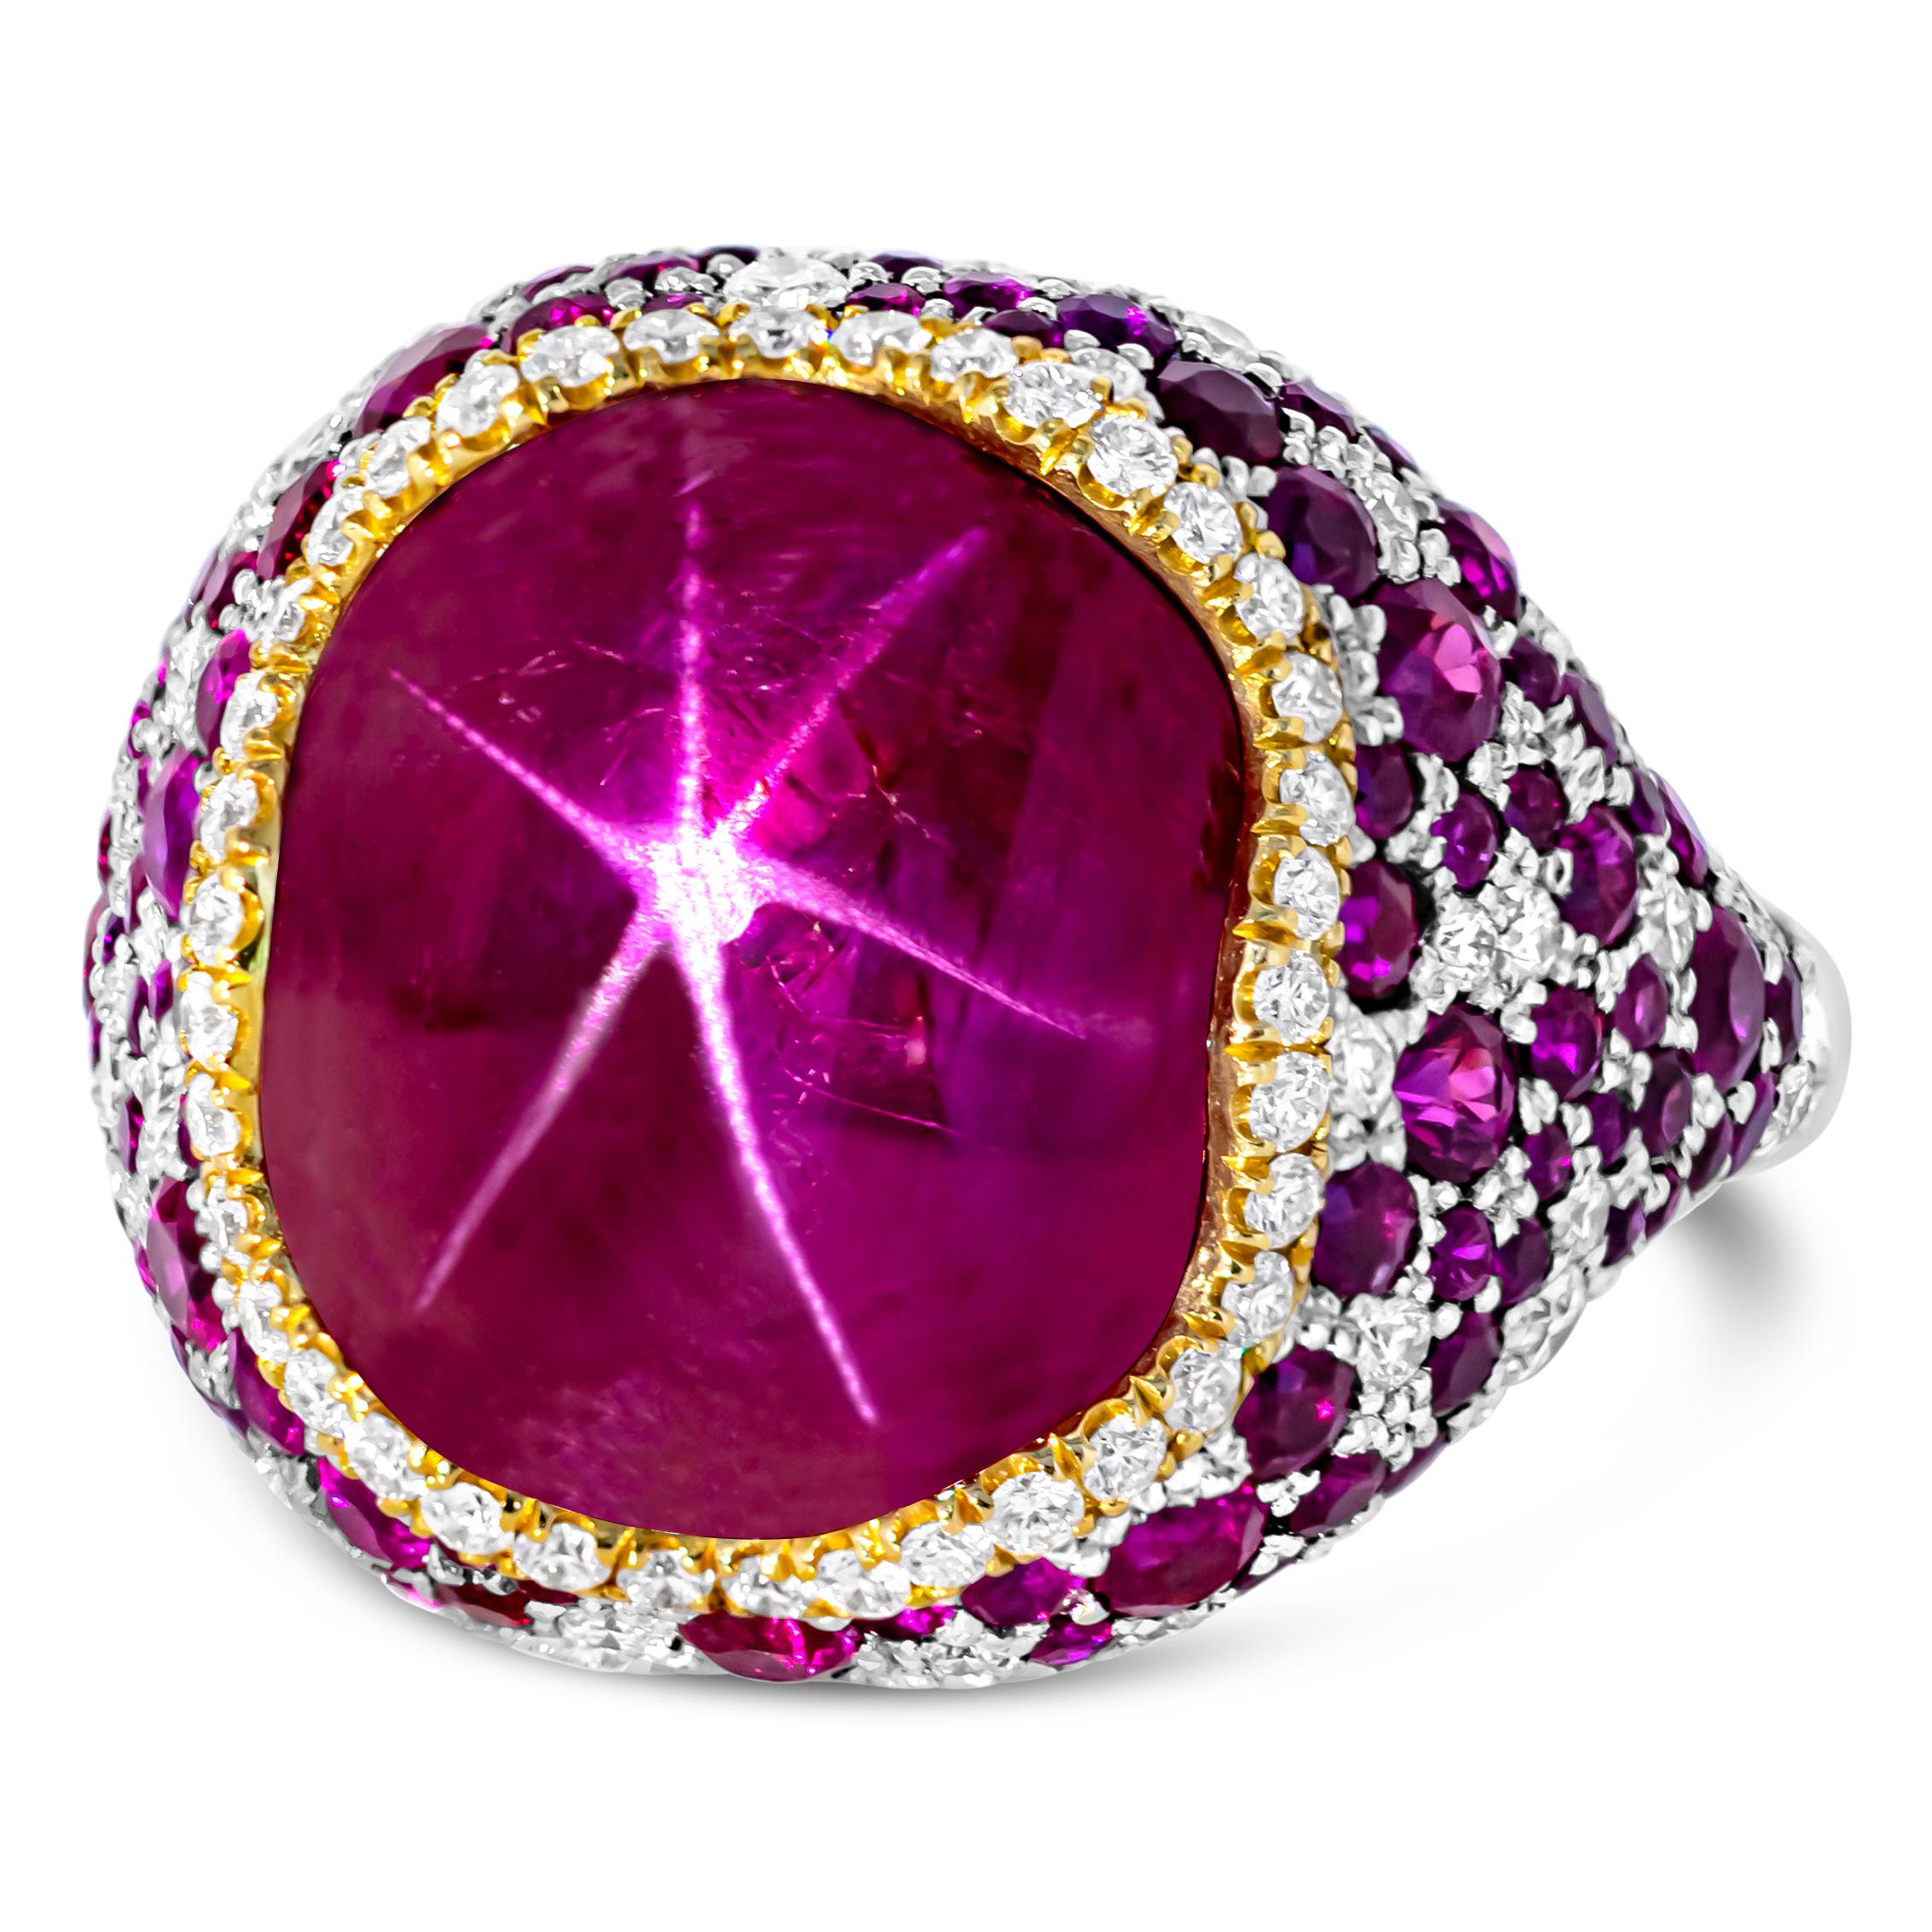 A fashionable and uniquely-designed cocktail ring showcasing a 11.28 carats cabochon star ruby certified by AGL as Burmese ruby with no indications of heat treatment. Accented with round melee rubies weighing 1.90 carats and round melee diamonds